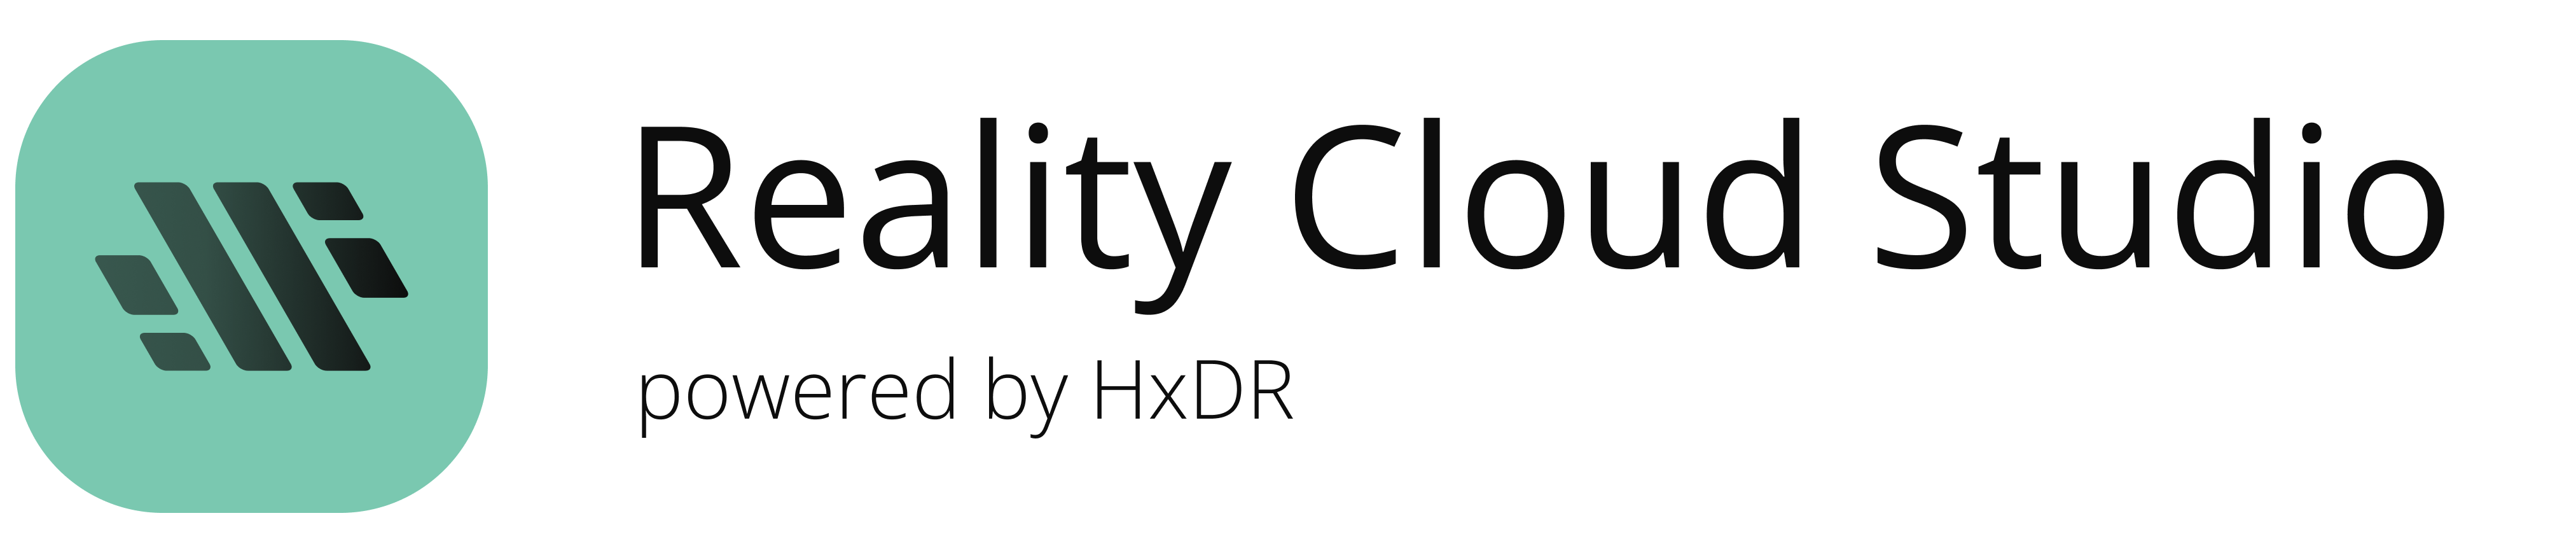 Reality Cloud Studio, powered by HxDR Symbool